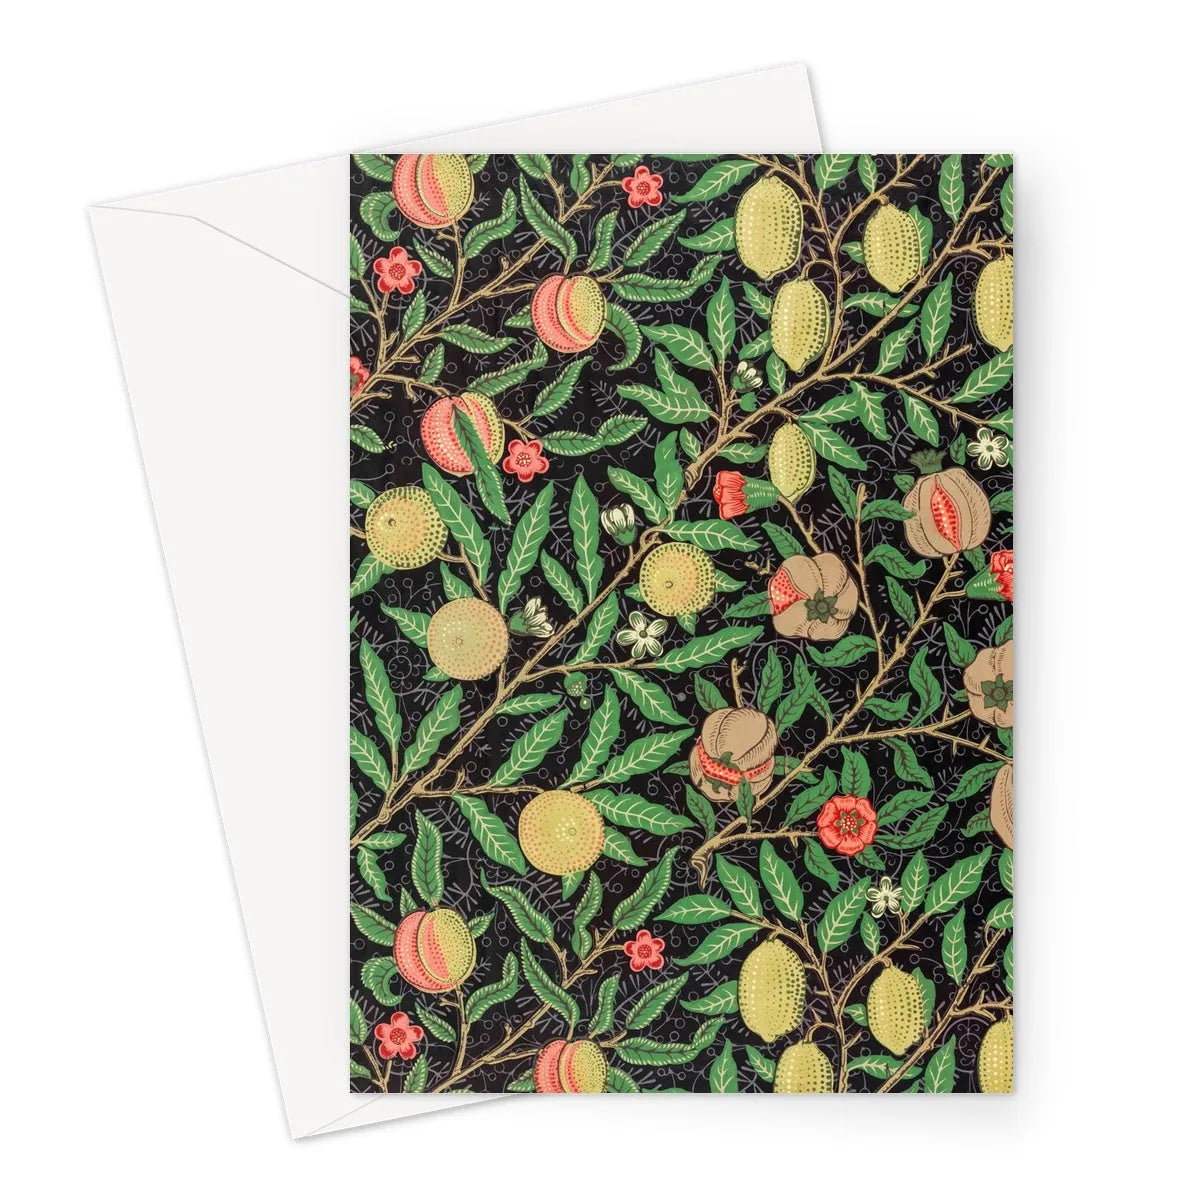 Four Fruits Too By William Morris Greeting Card - A5 Portrait / 1 Card - Greeting & Note Cards - Aesthetic Art